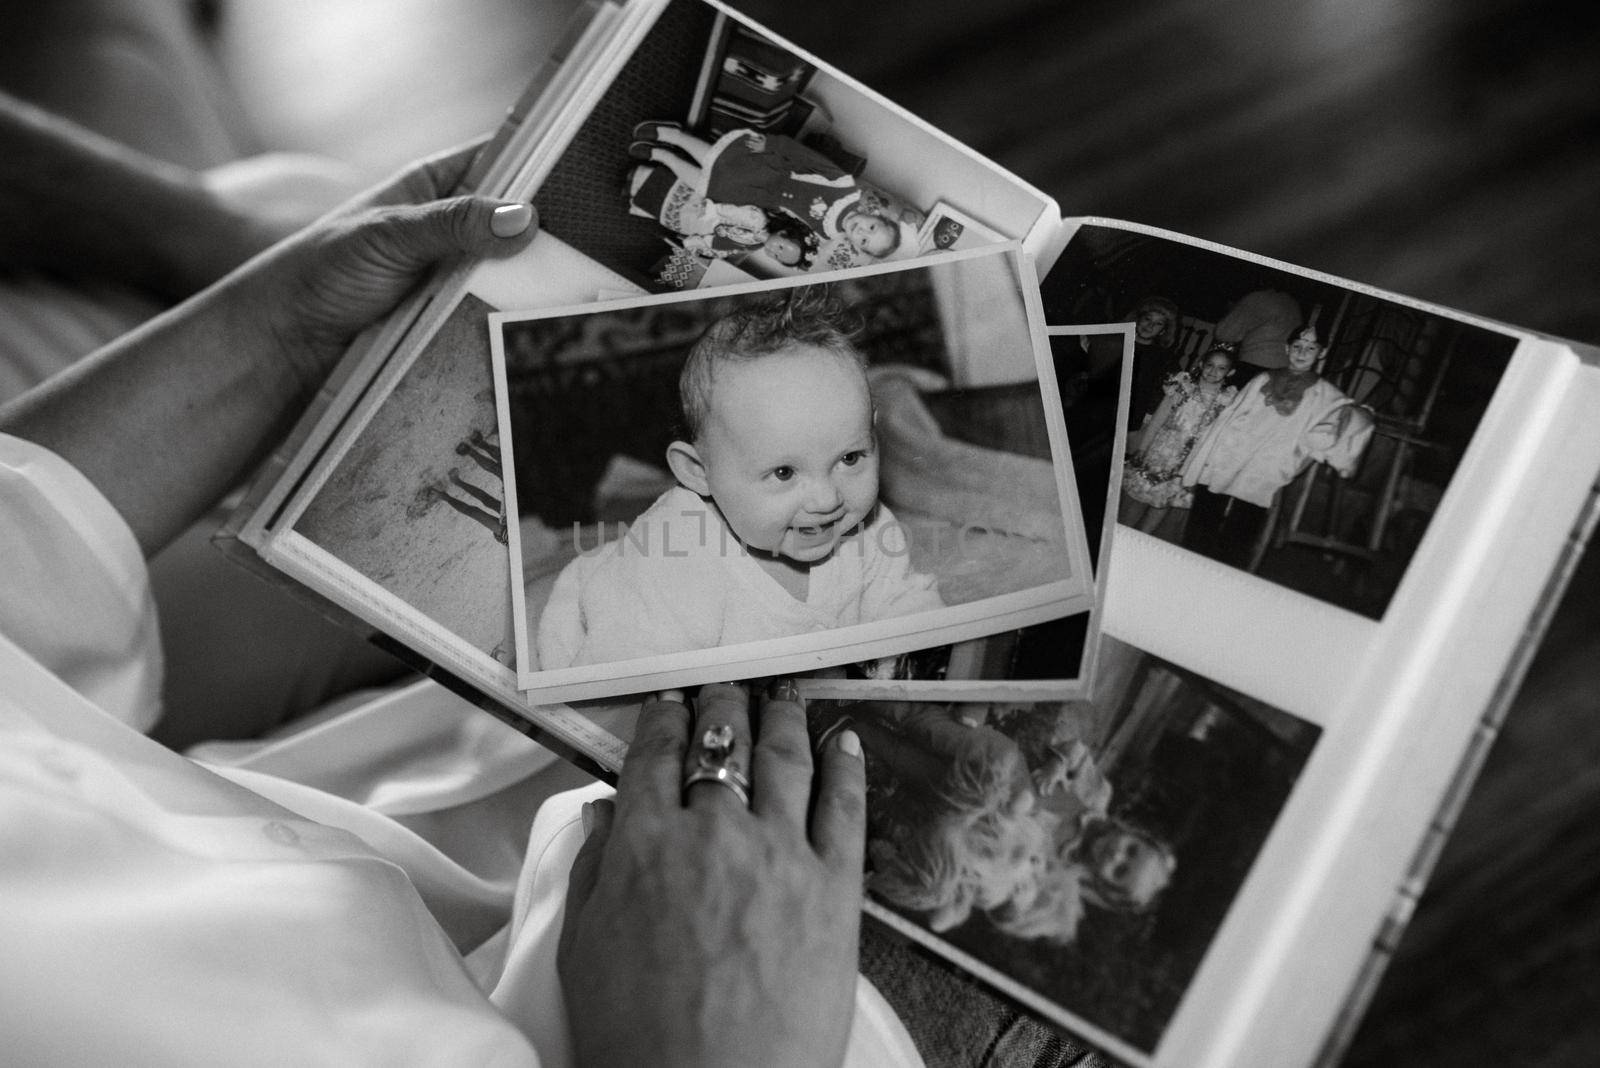 children's photo album with color and black-and-white photos by Andreua